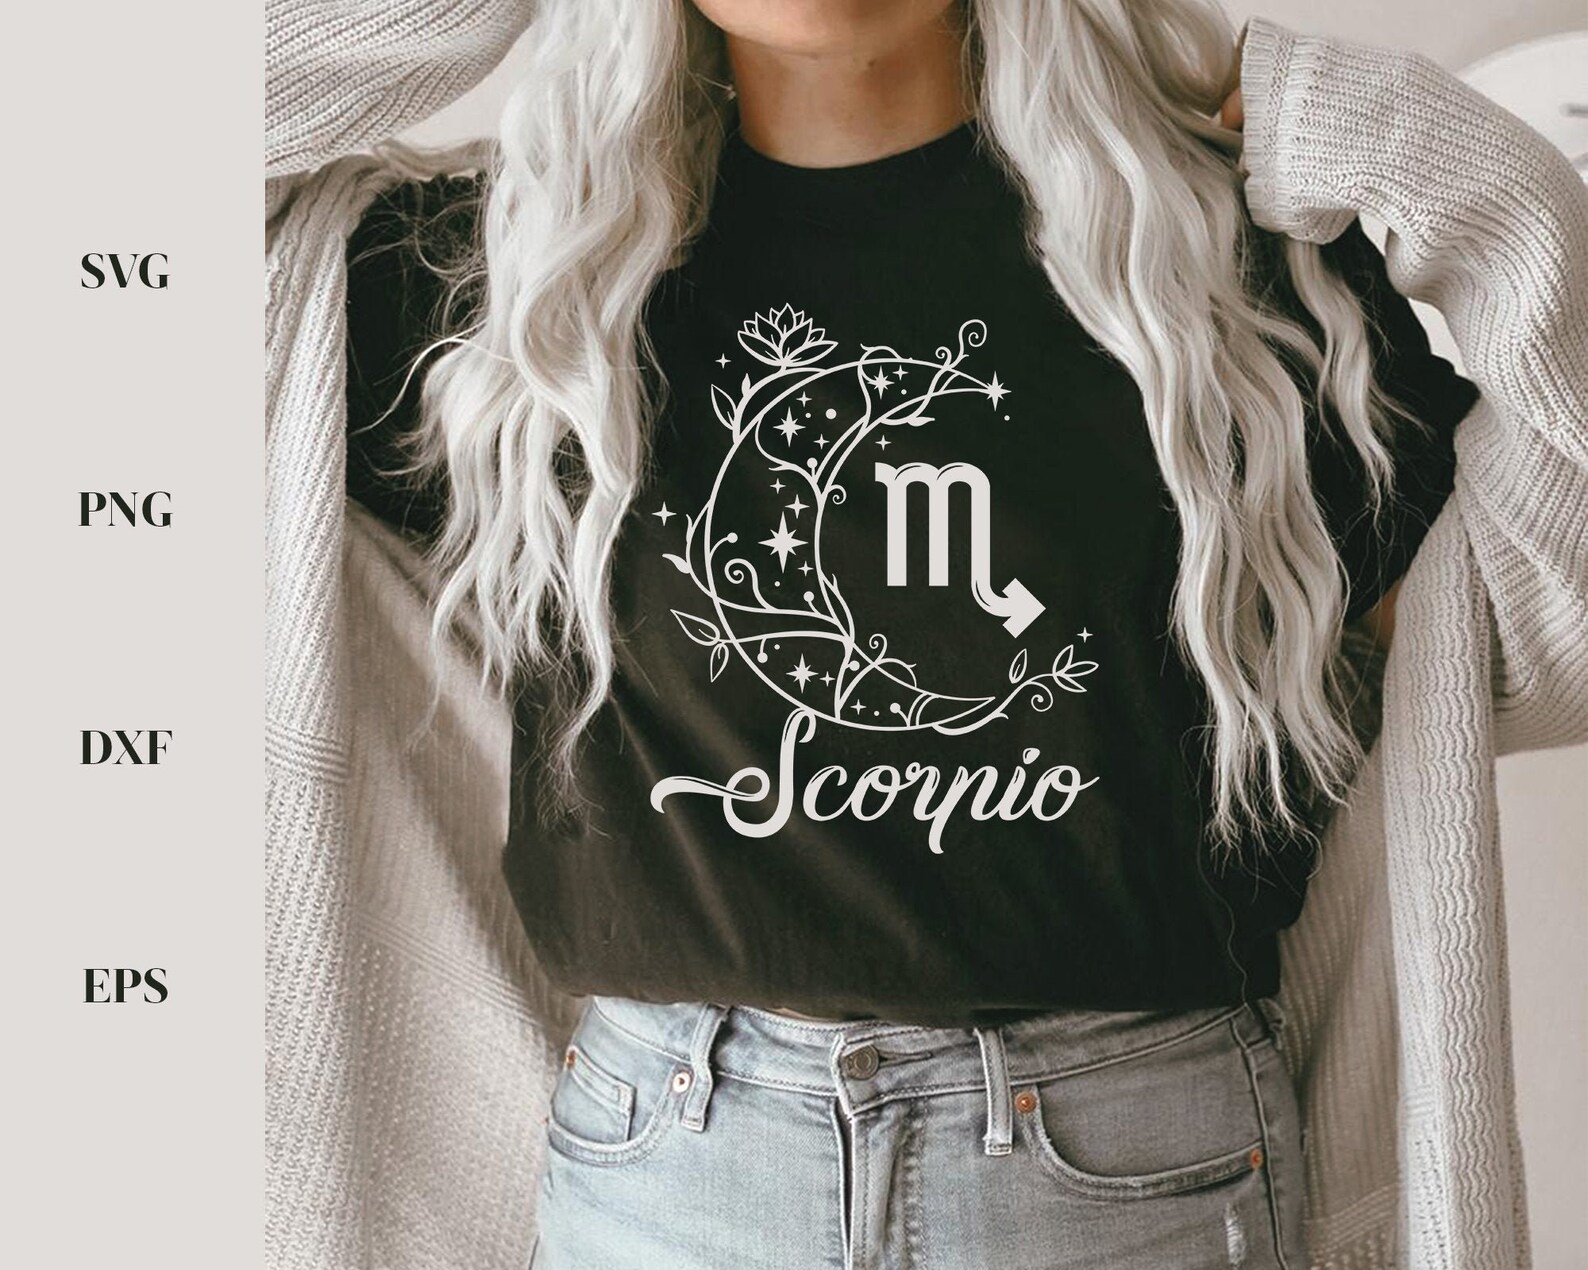 Woman wearing a black shirt with a zodiac sign on it.